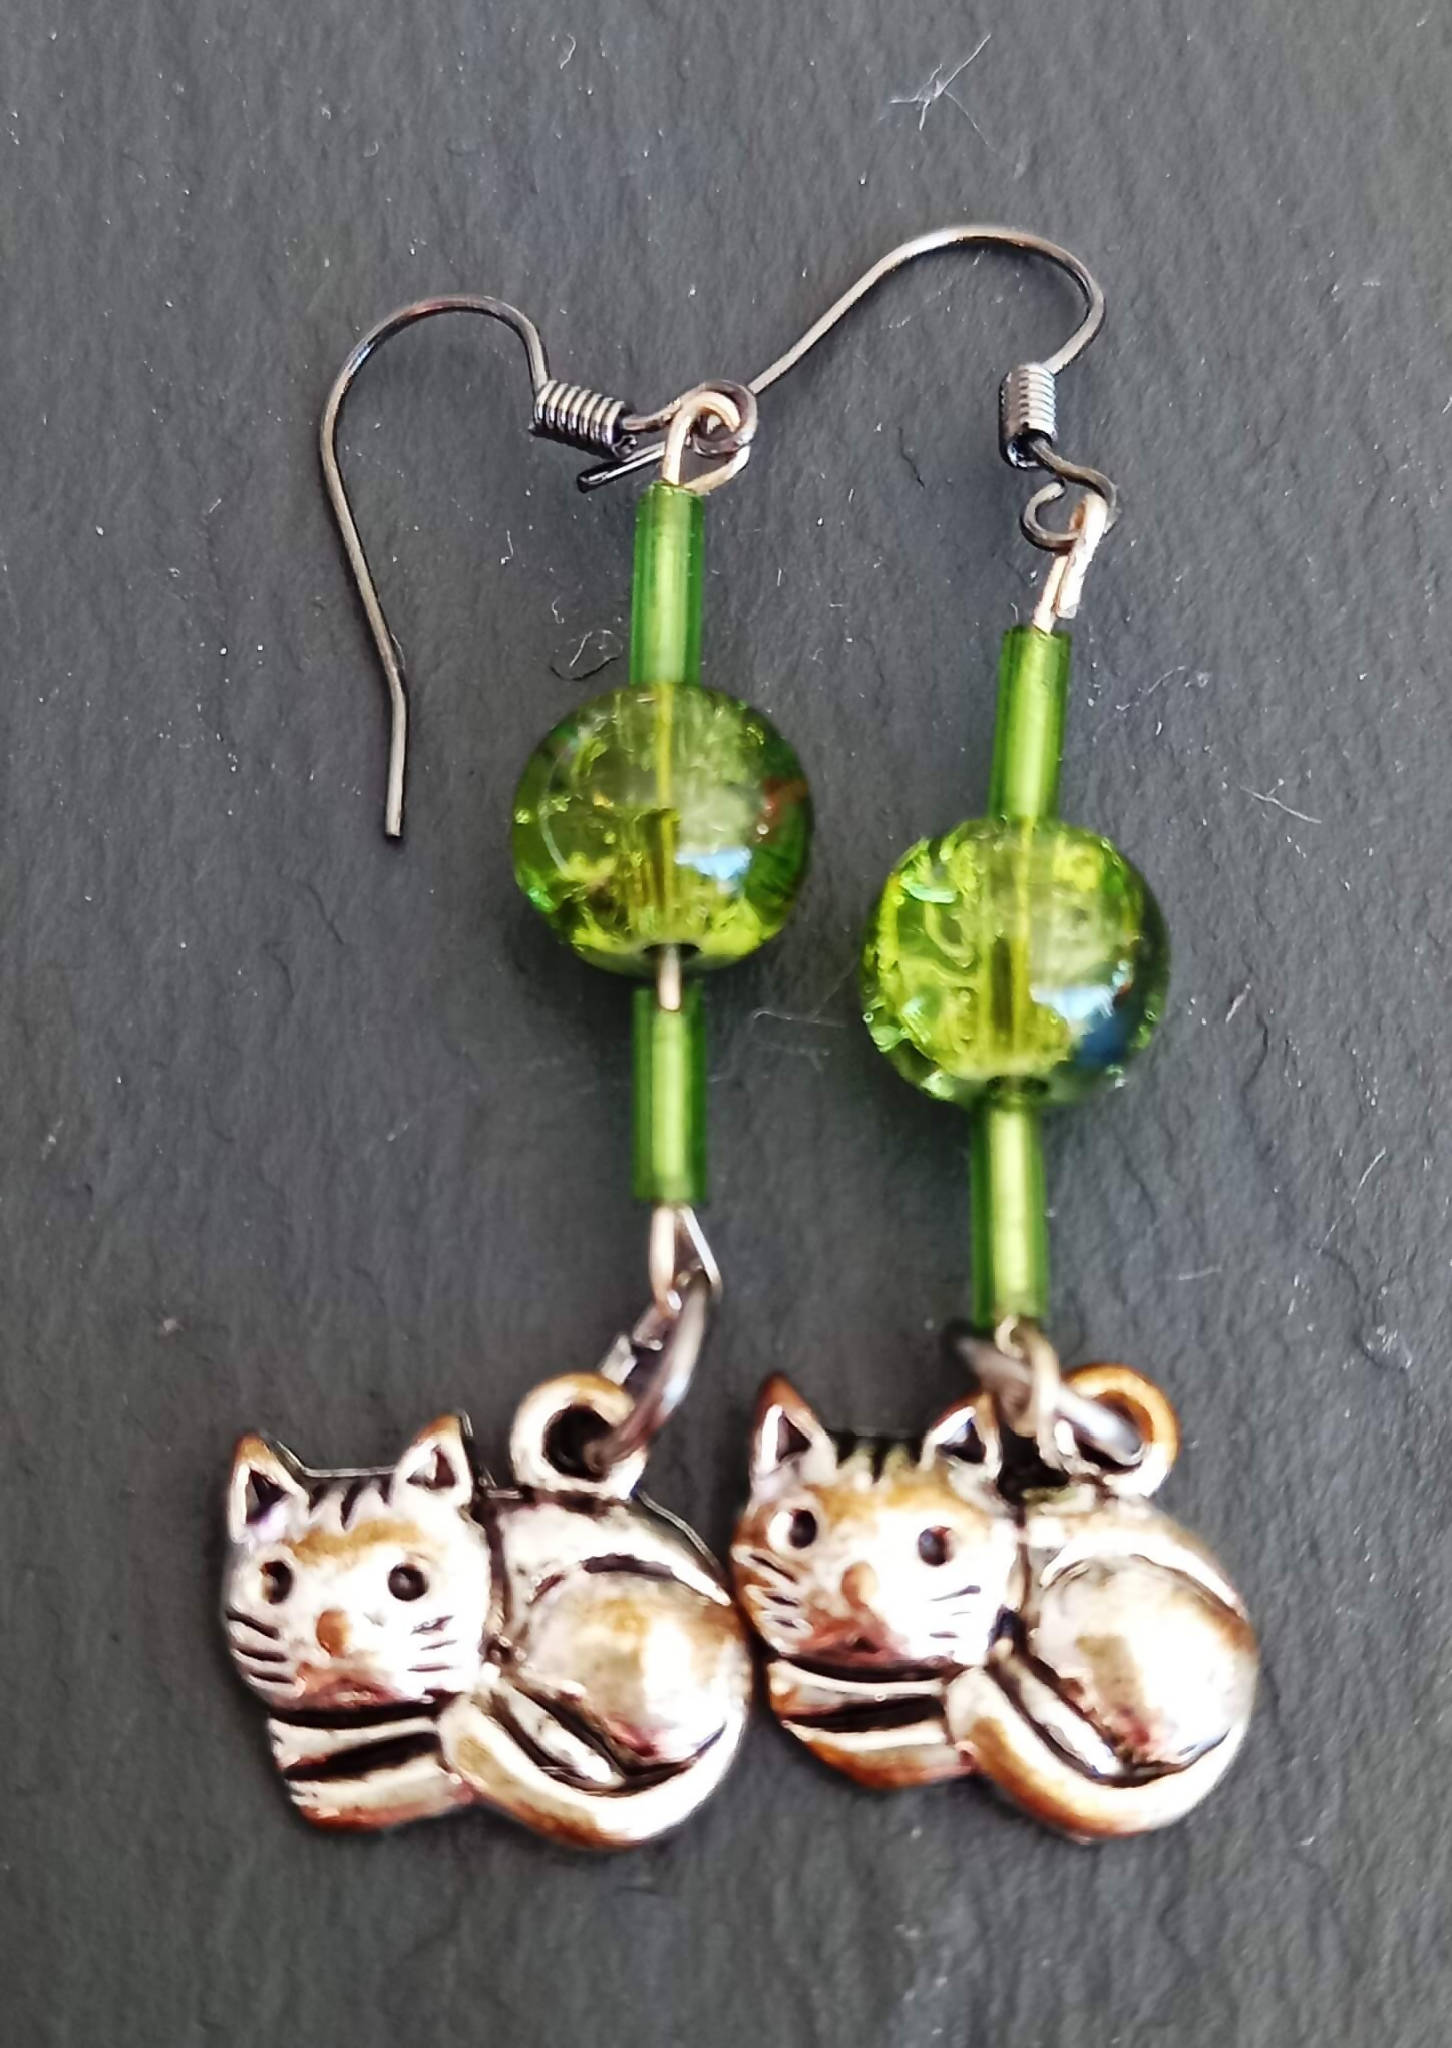 Earrings - Green and Silver Cat Charms